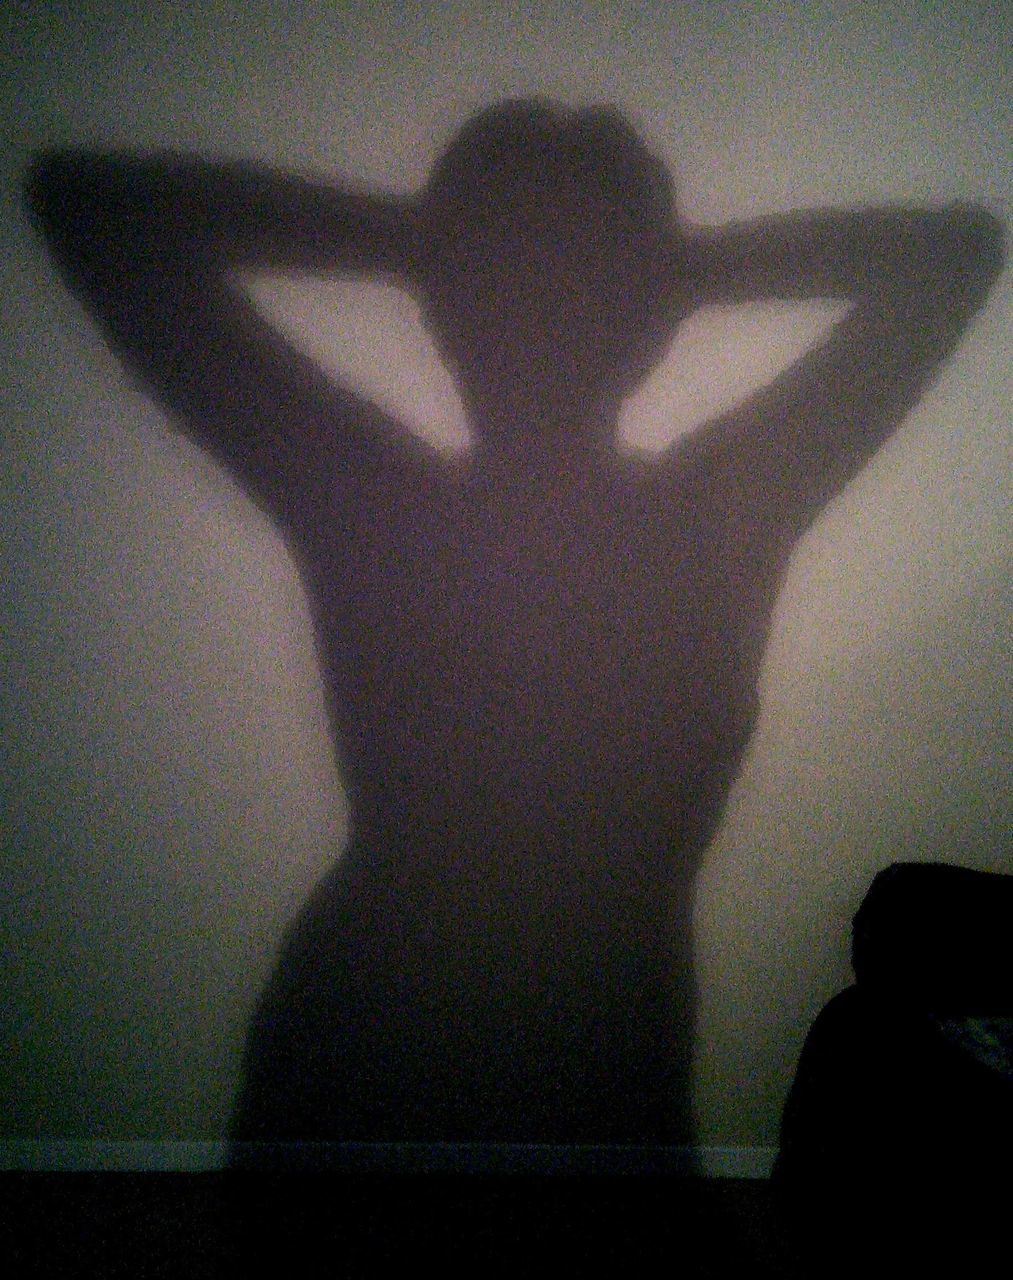 shadow, lifestyles, indoors, leisure activity, standing, focus on shadow, wall - building feature, silhouette, person, men, sunlight, unrecognizable person, high angle view, three quarter length, human representation, young adult, low section, day